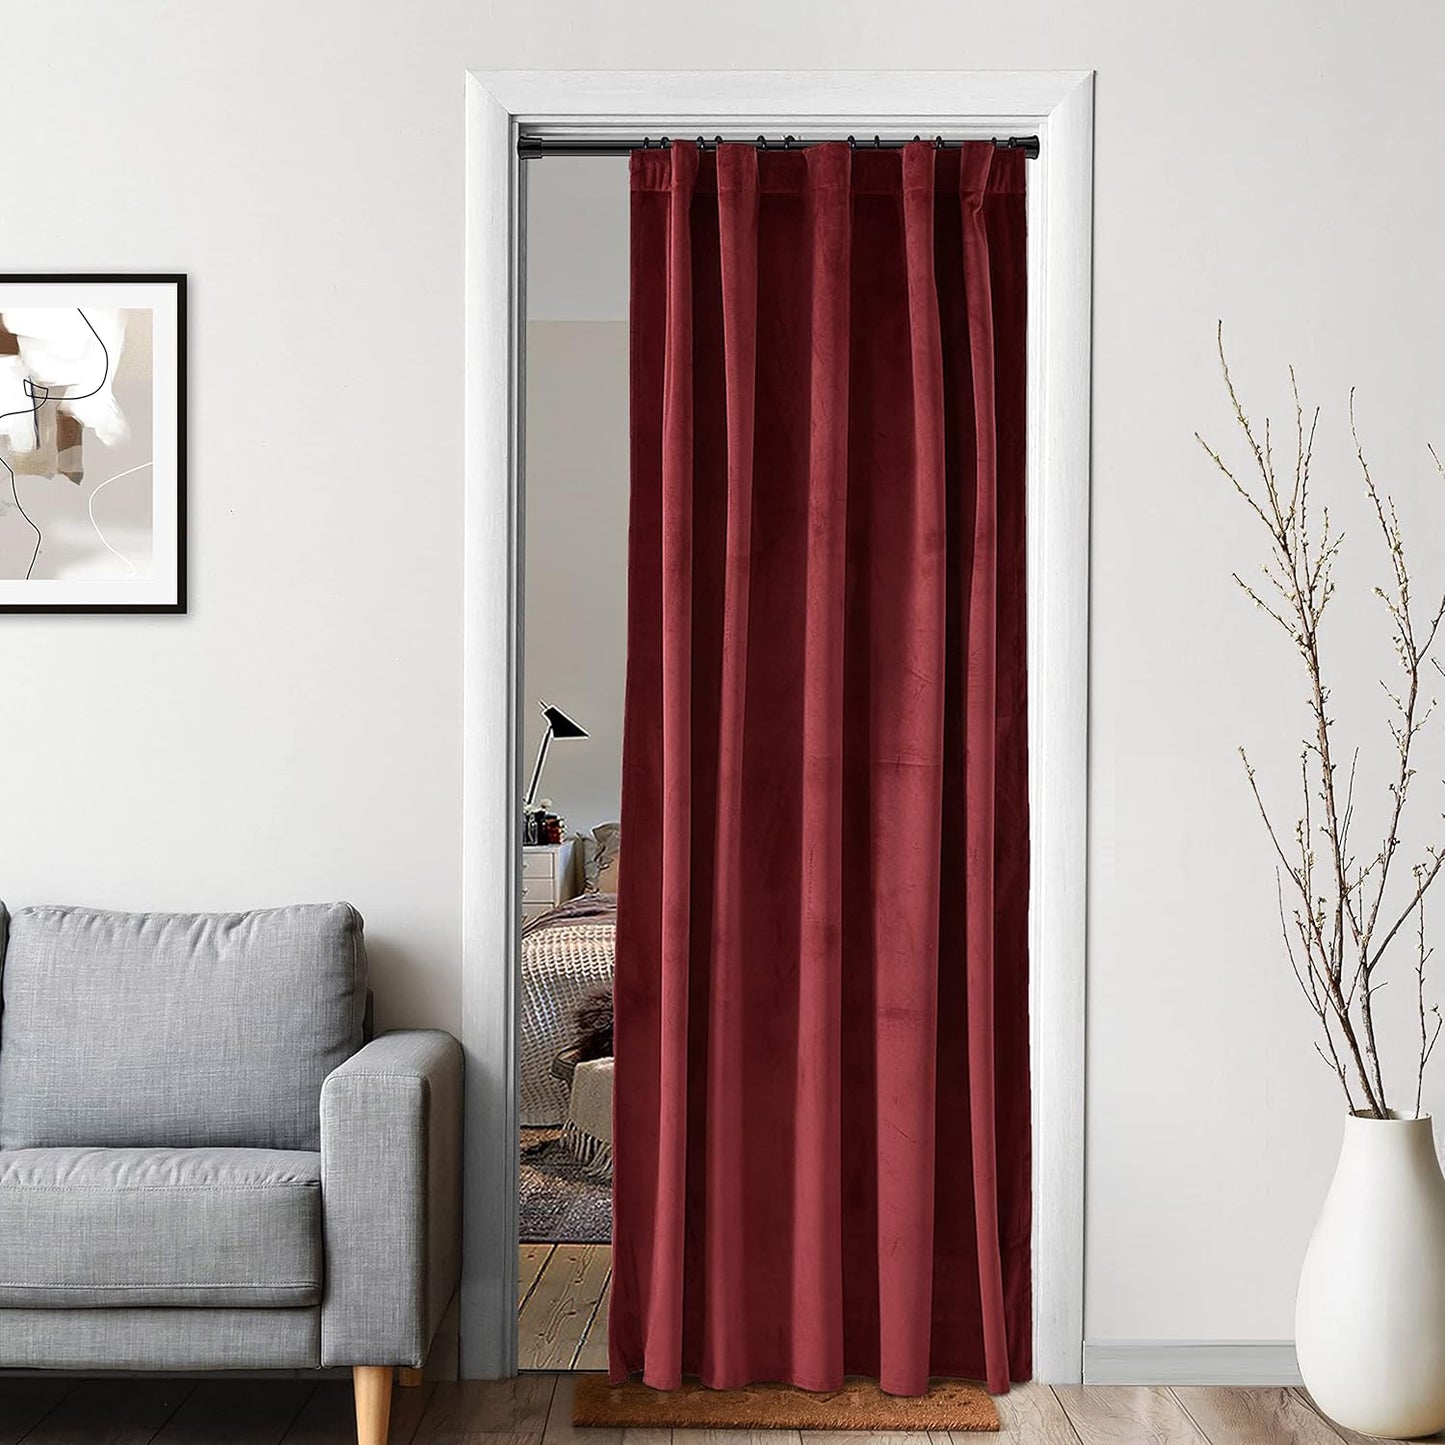 XTMYI Velvet Blackout Door Curtain Panels for Bedroom,Thermal Insulated Winter Warm Back Tab Rod Pocket Black Out Cover Doorway Curtains Privacy/Window Drapes,80 Inch Length  XTMYI TEXTILE Burgundy 52X80 